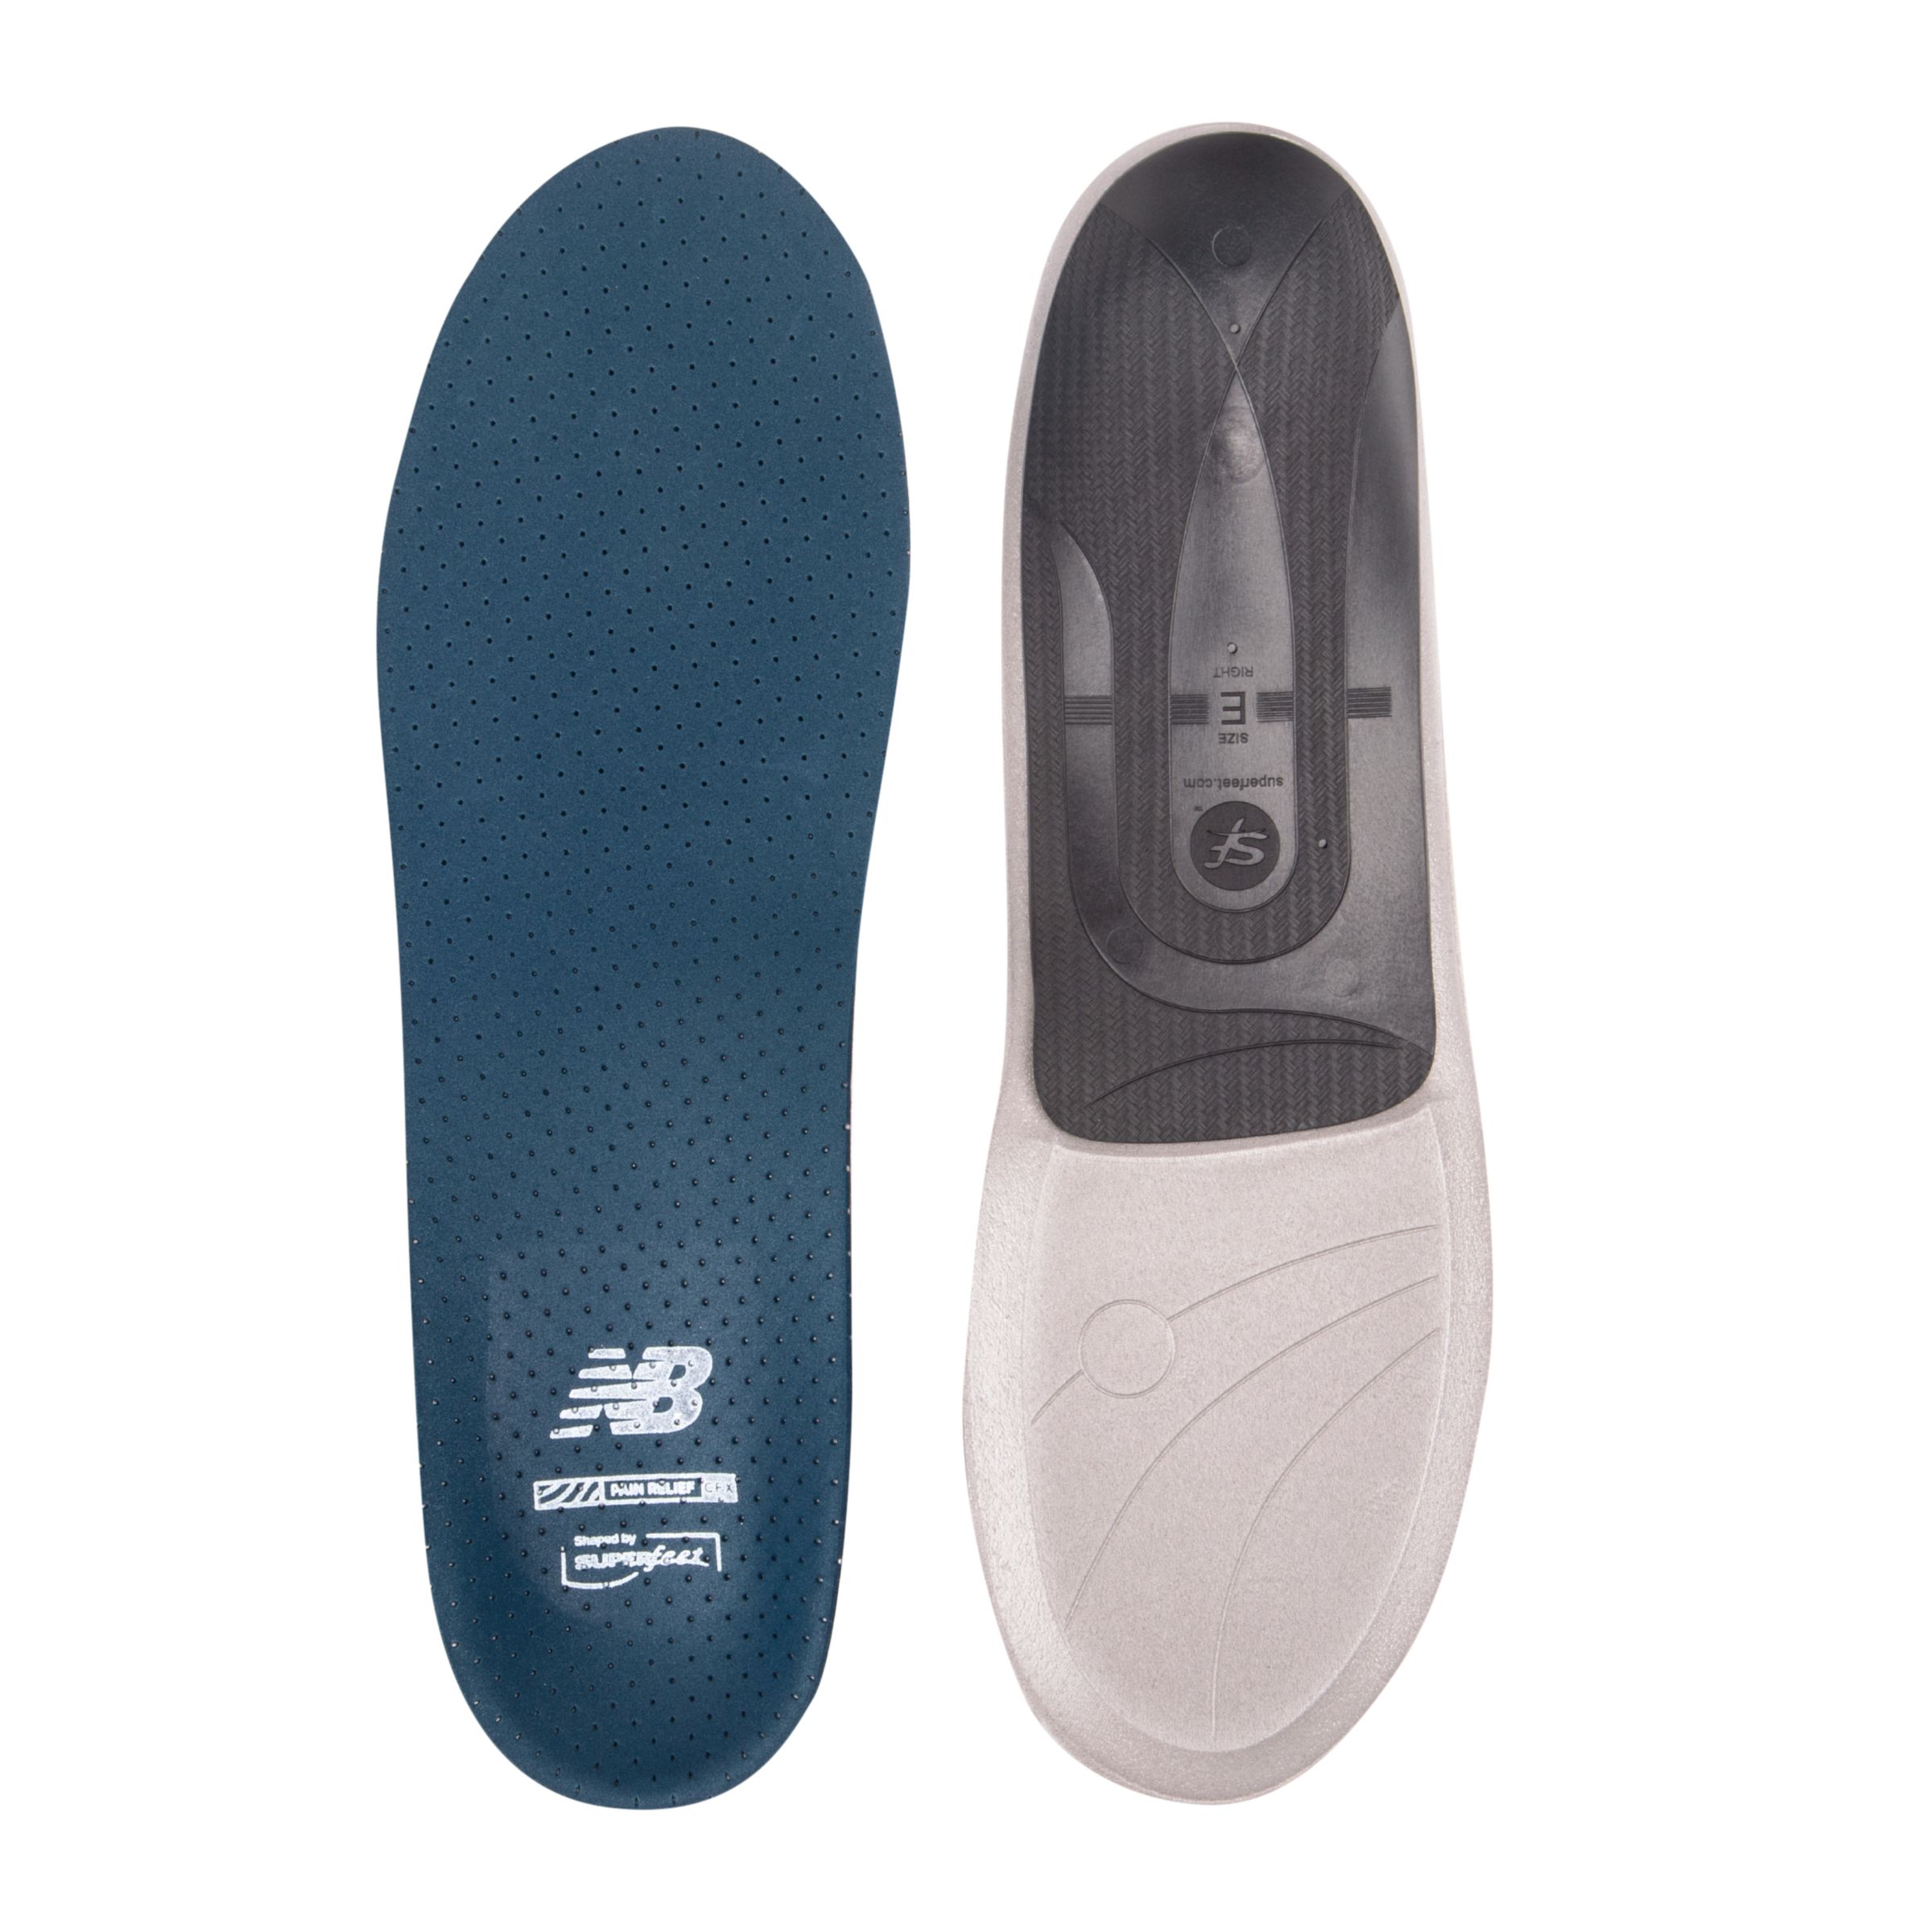 new balance pressure relief insoles $16